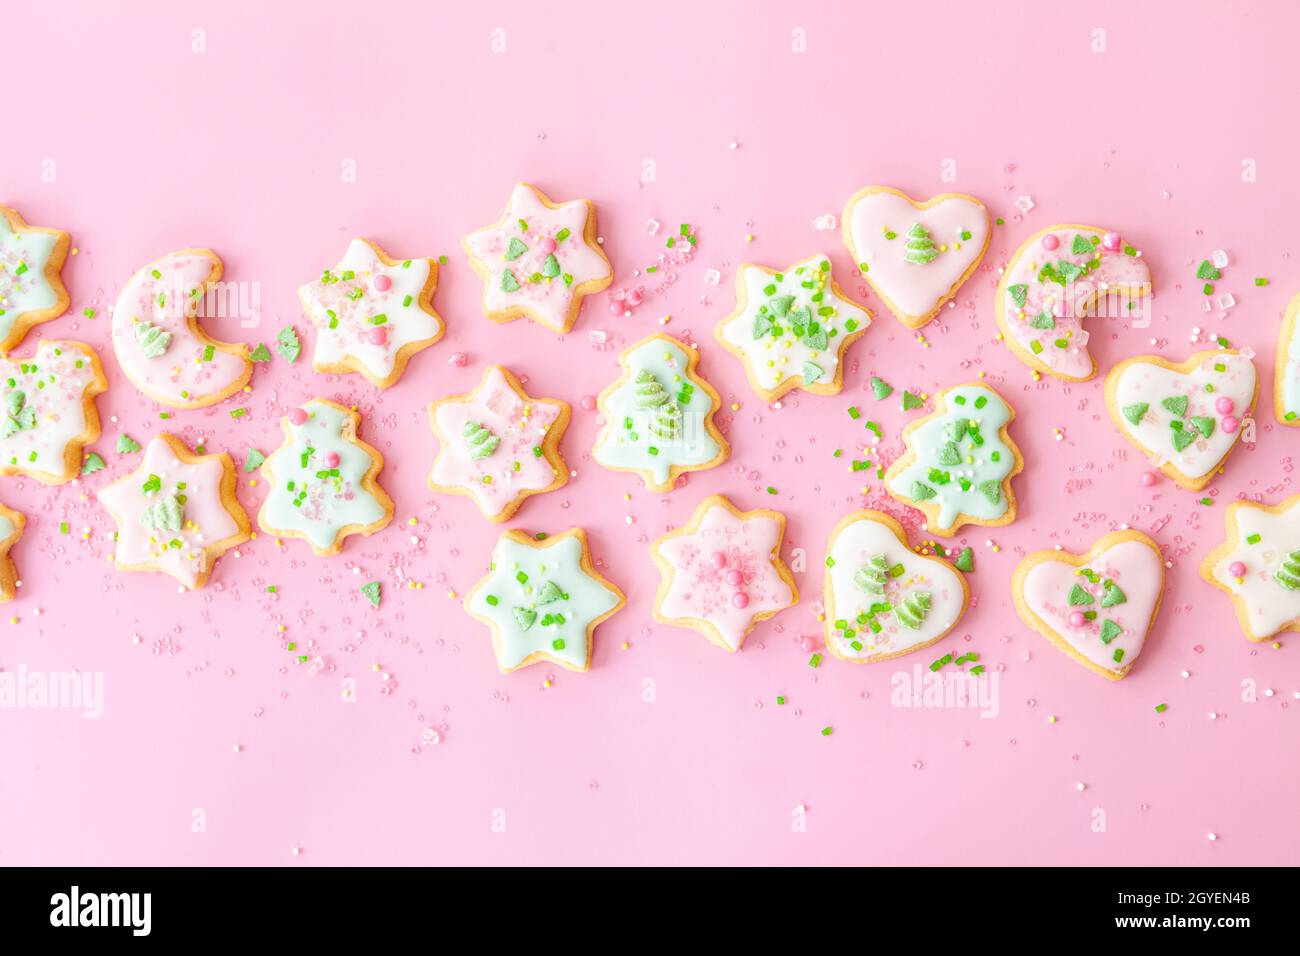 Colorful Christmas cookies with sugar sprinkles on a pink background Stock Photo